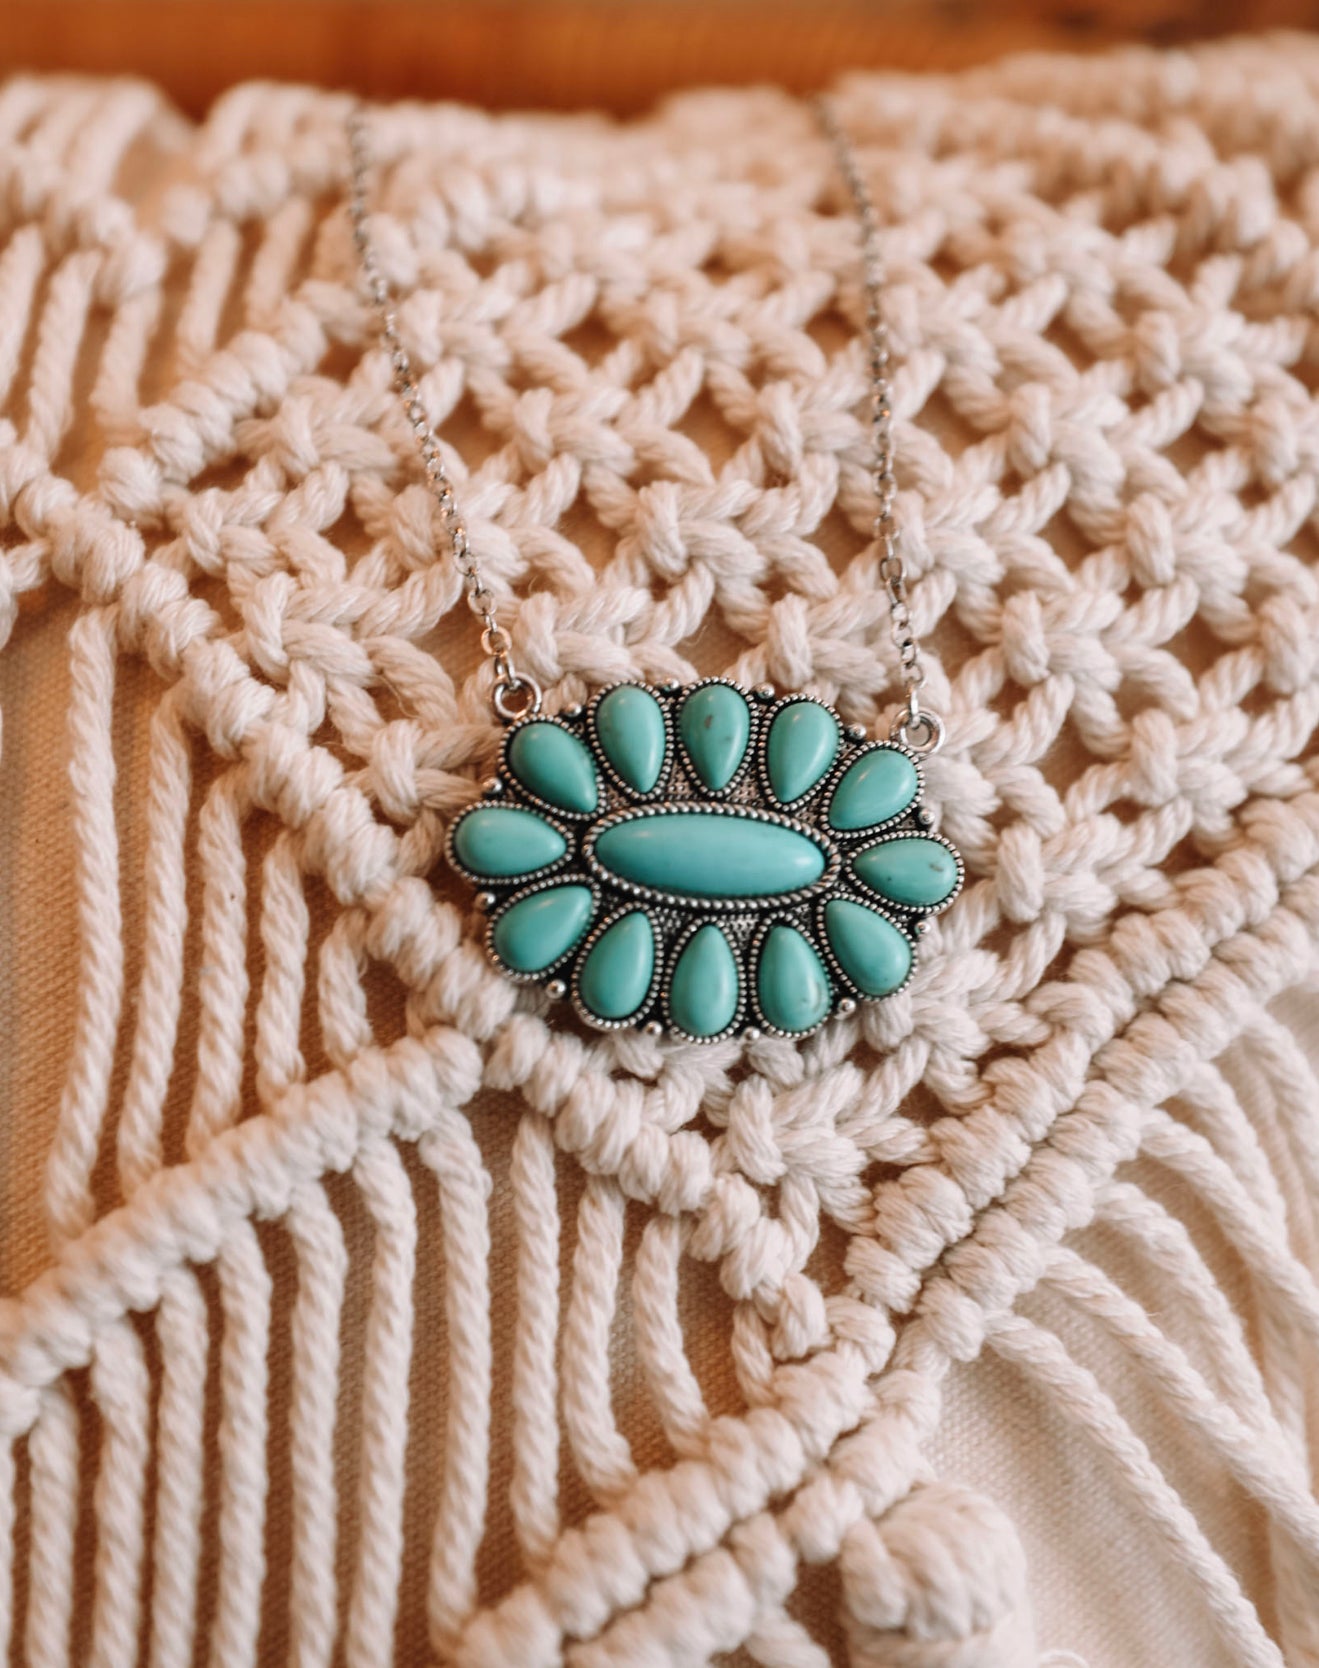 Way Out West Turquoise Pendant Necklace